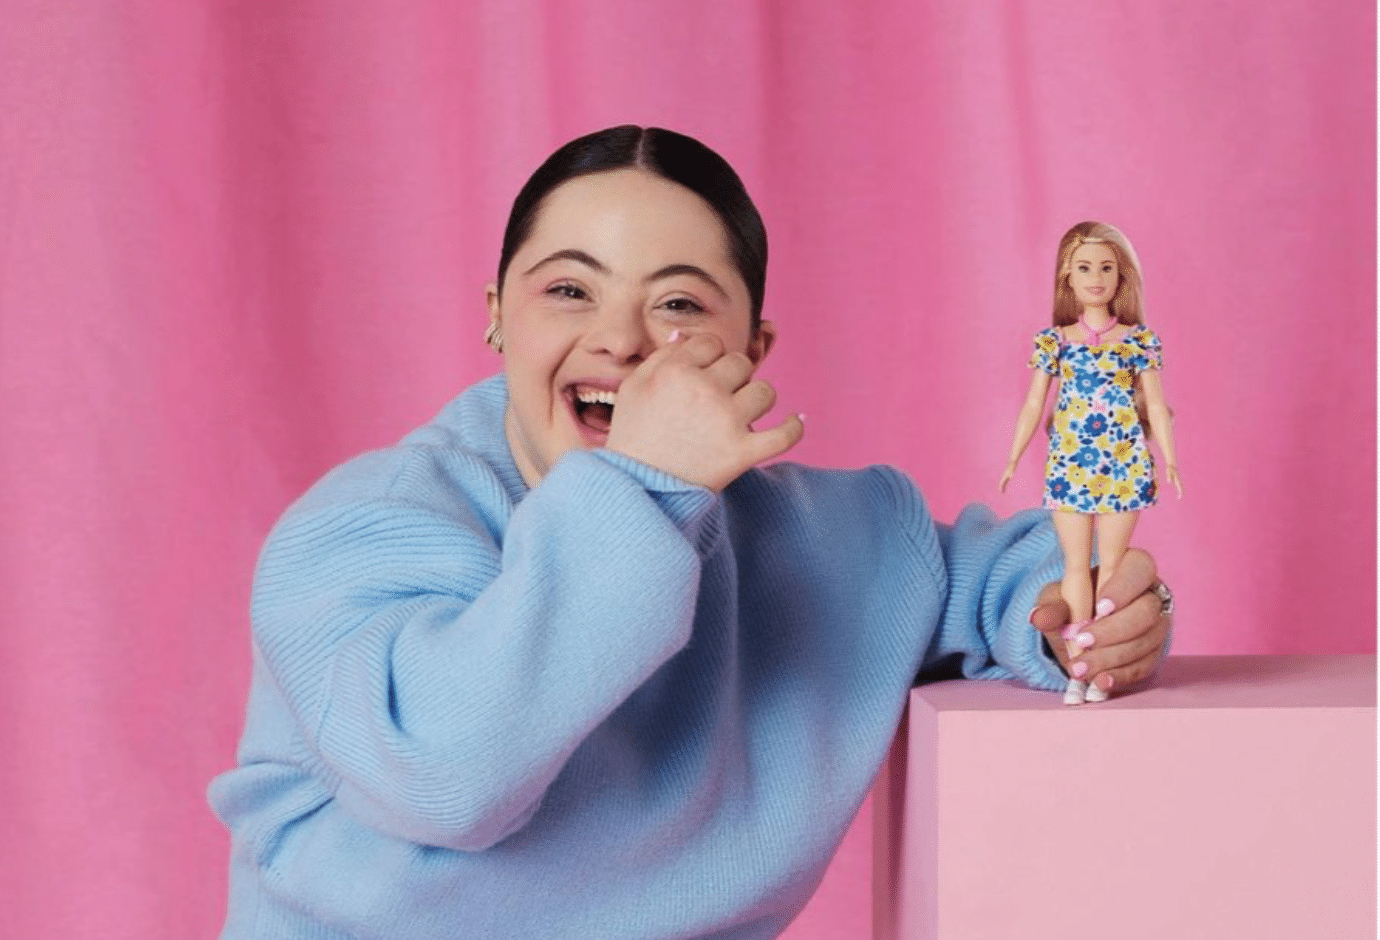 A new Barbie with Down's syndrome hits stores